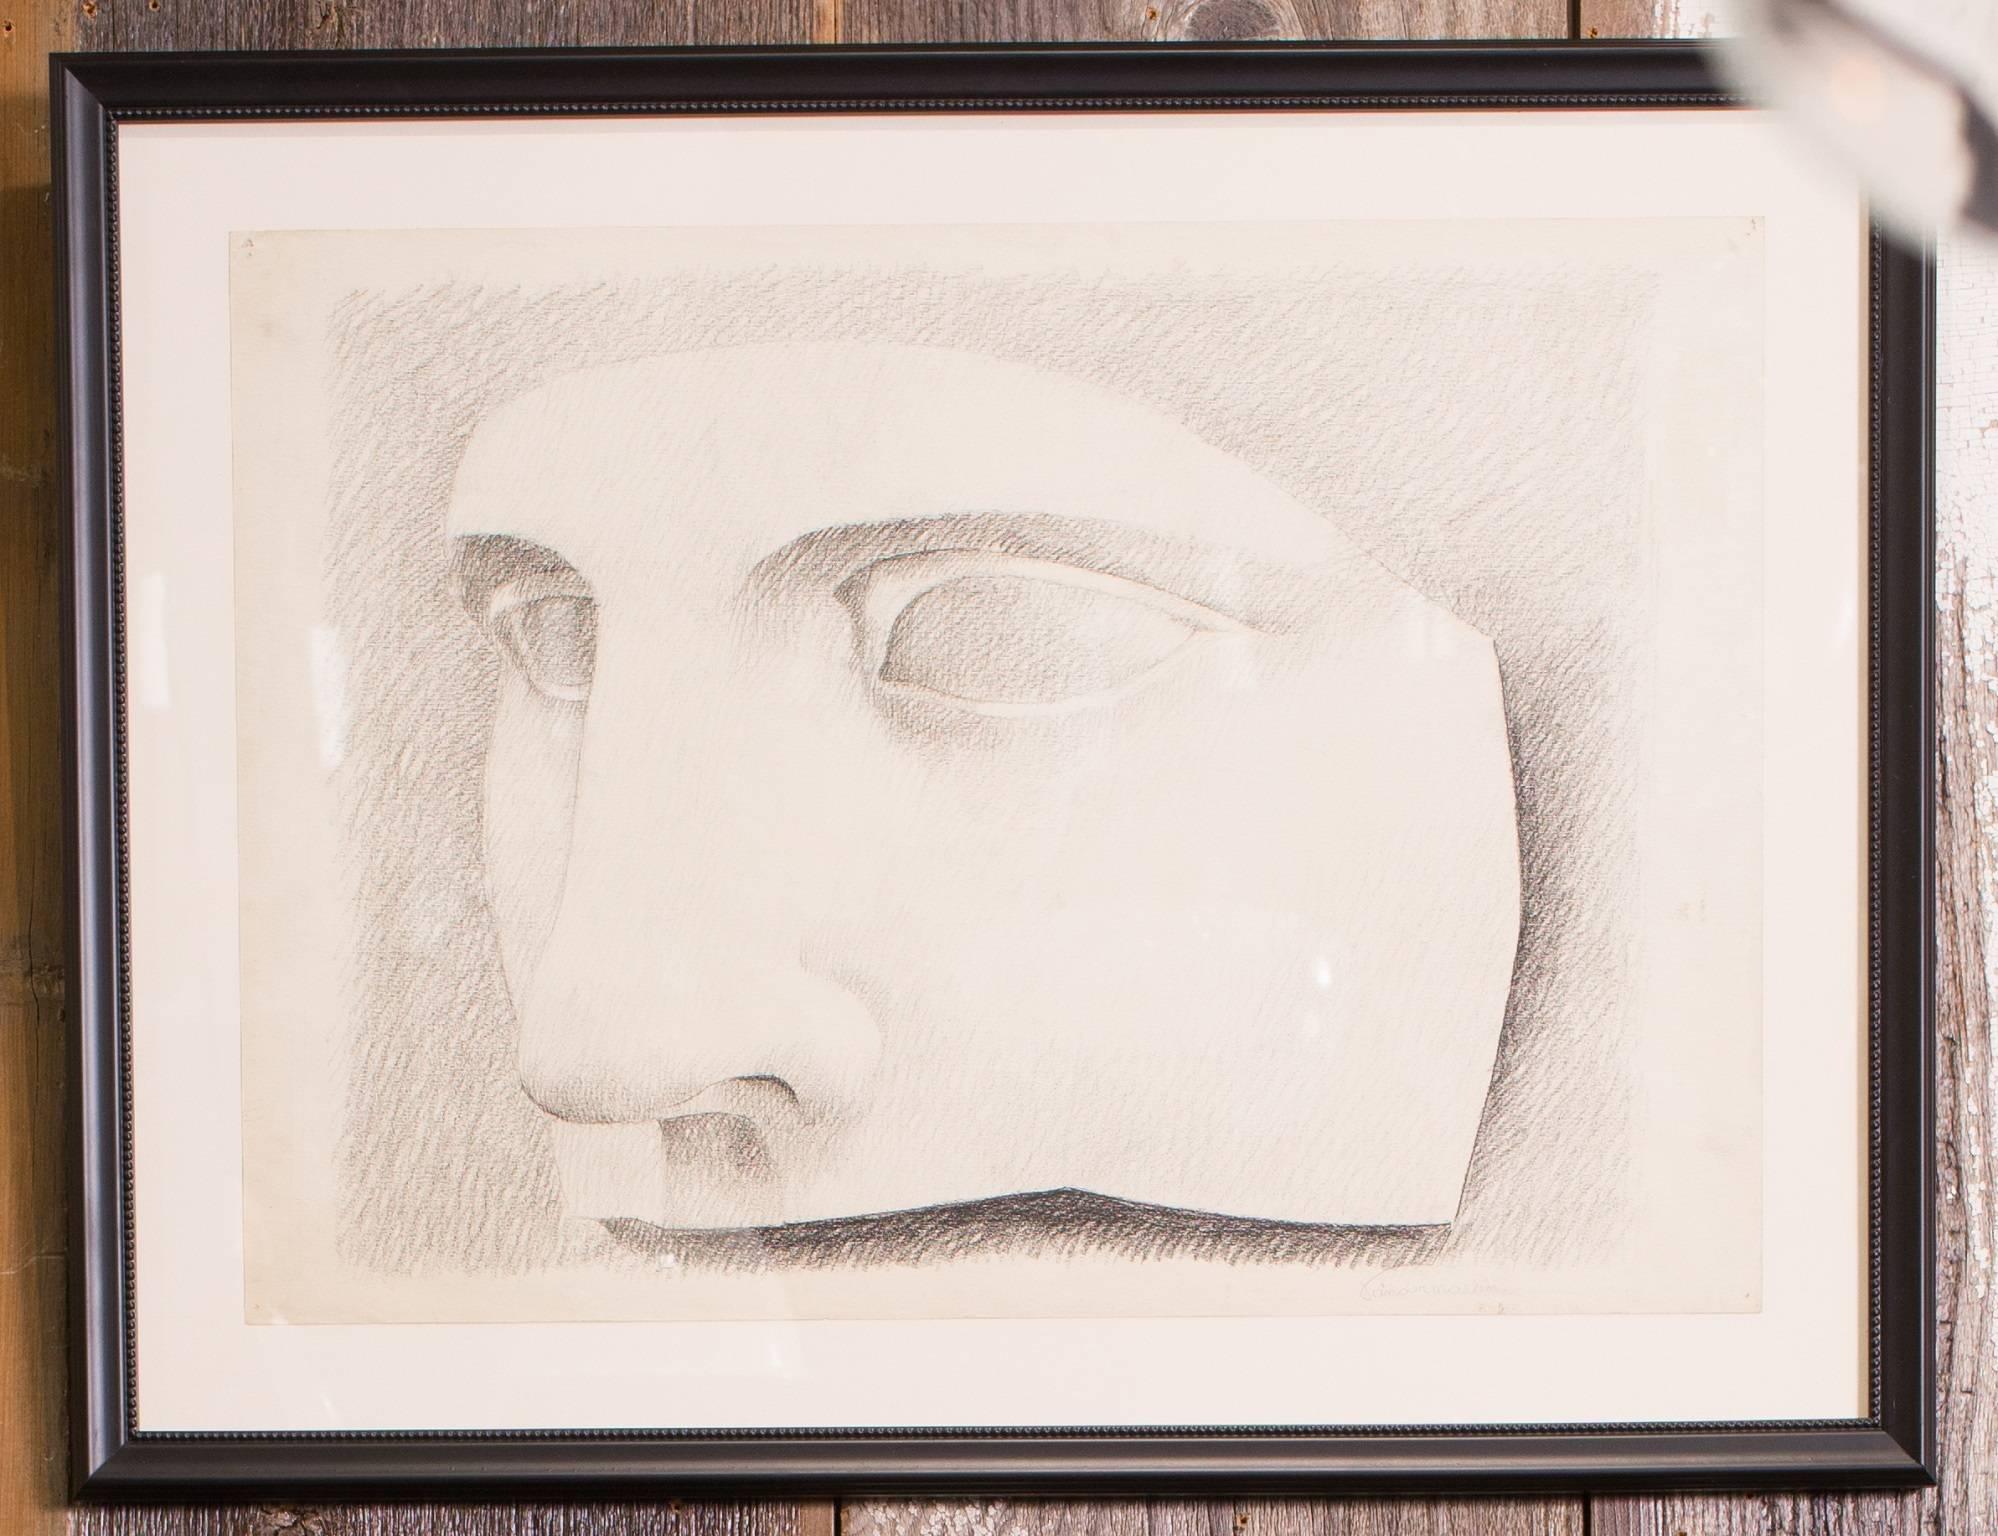 One of a kind, large black and white works of art, graphite drawn on paper depicting sculptural facial fragments of classical statues. From Belgium, circa 1950s. Mounted paper, newly framed behind glass in custom wood frames. All three sighed by the